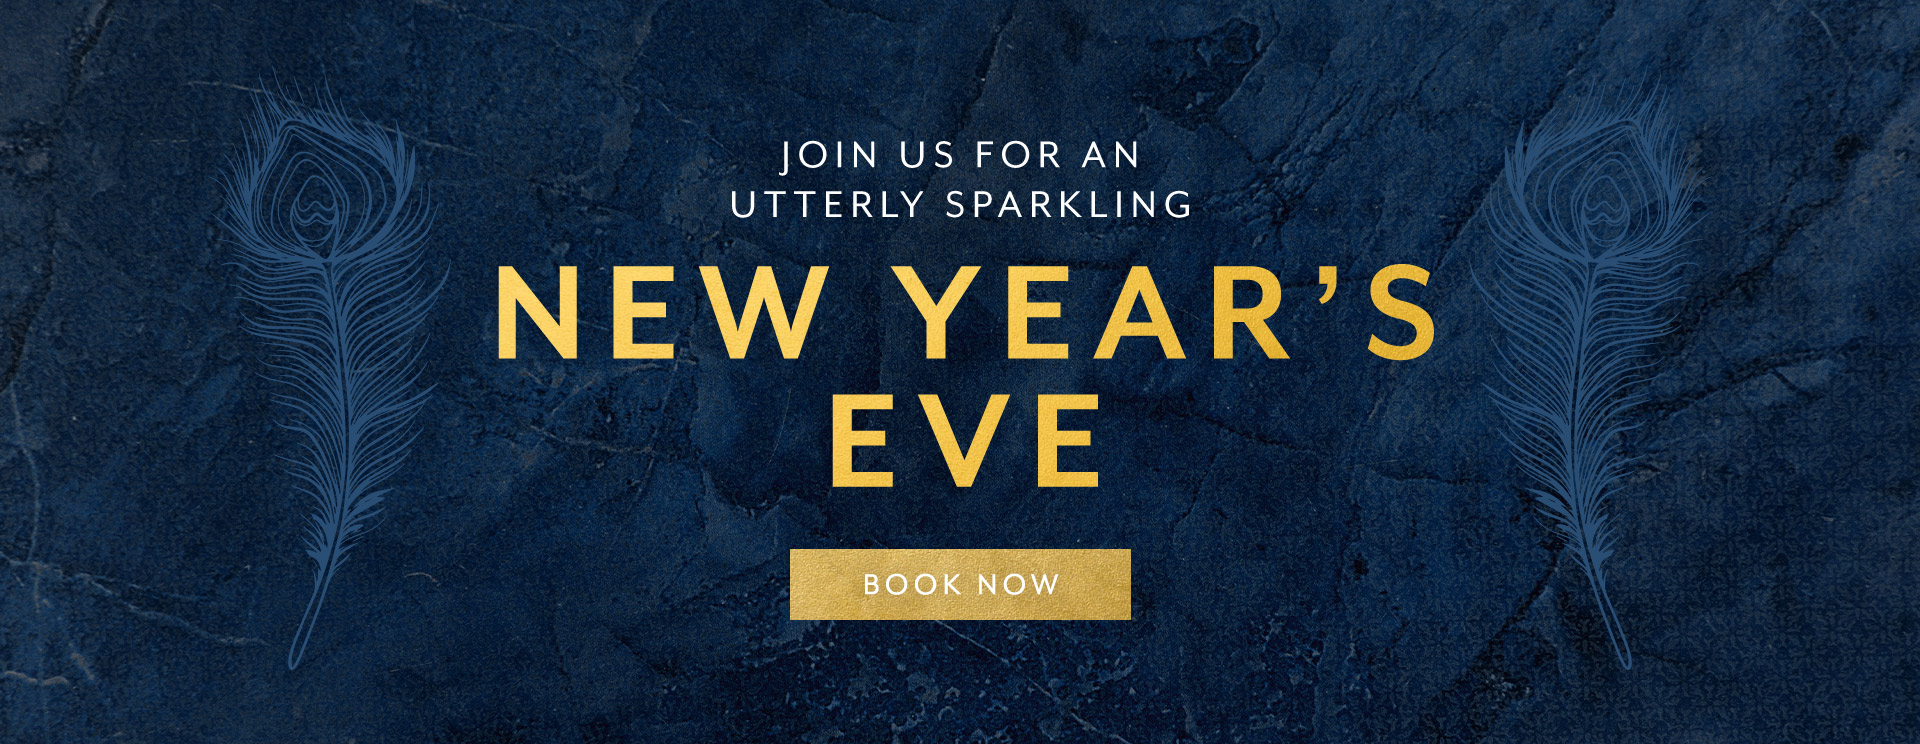 New Year's Eve at The Dukes Head